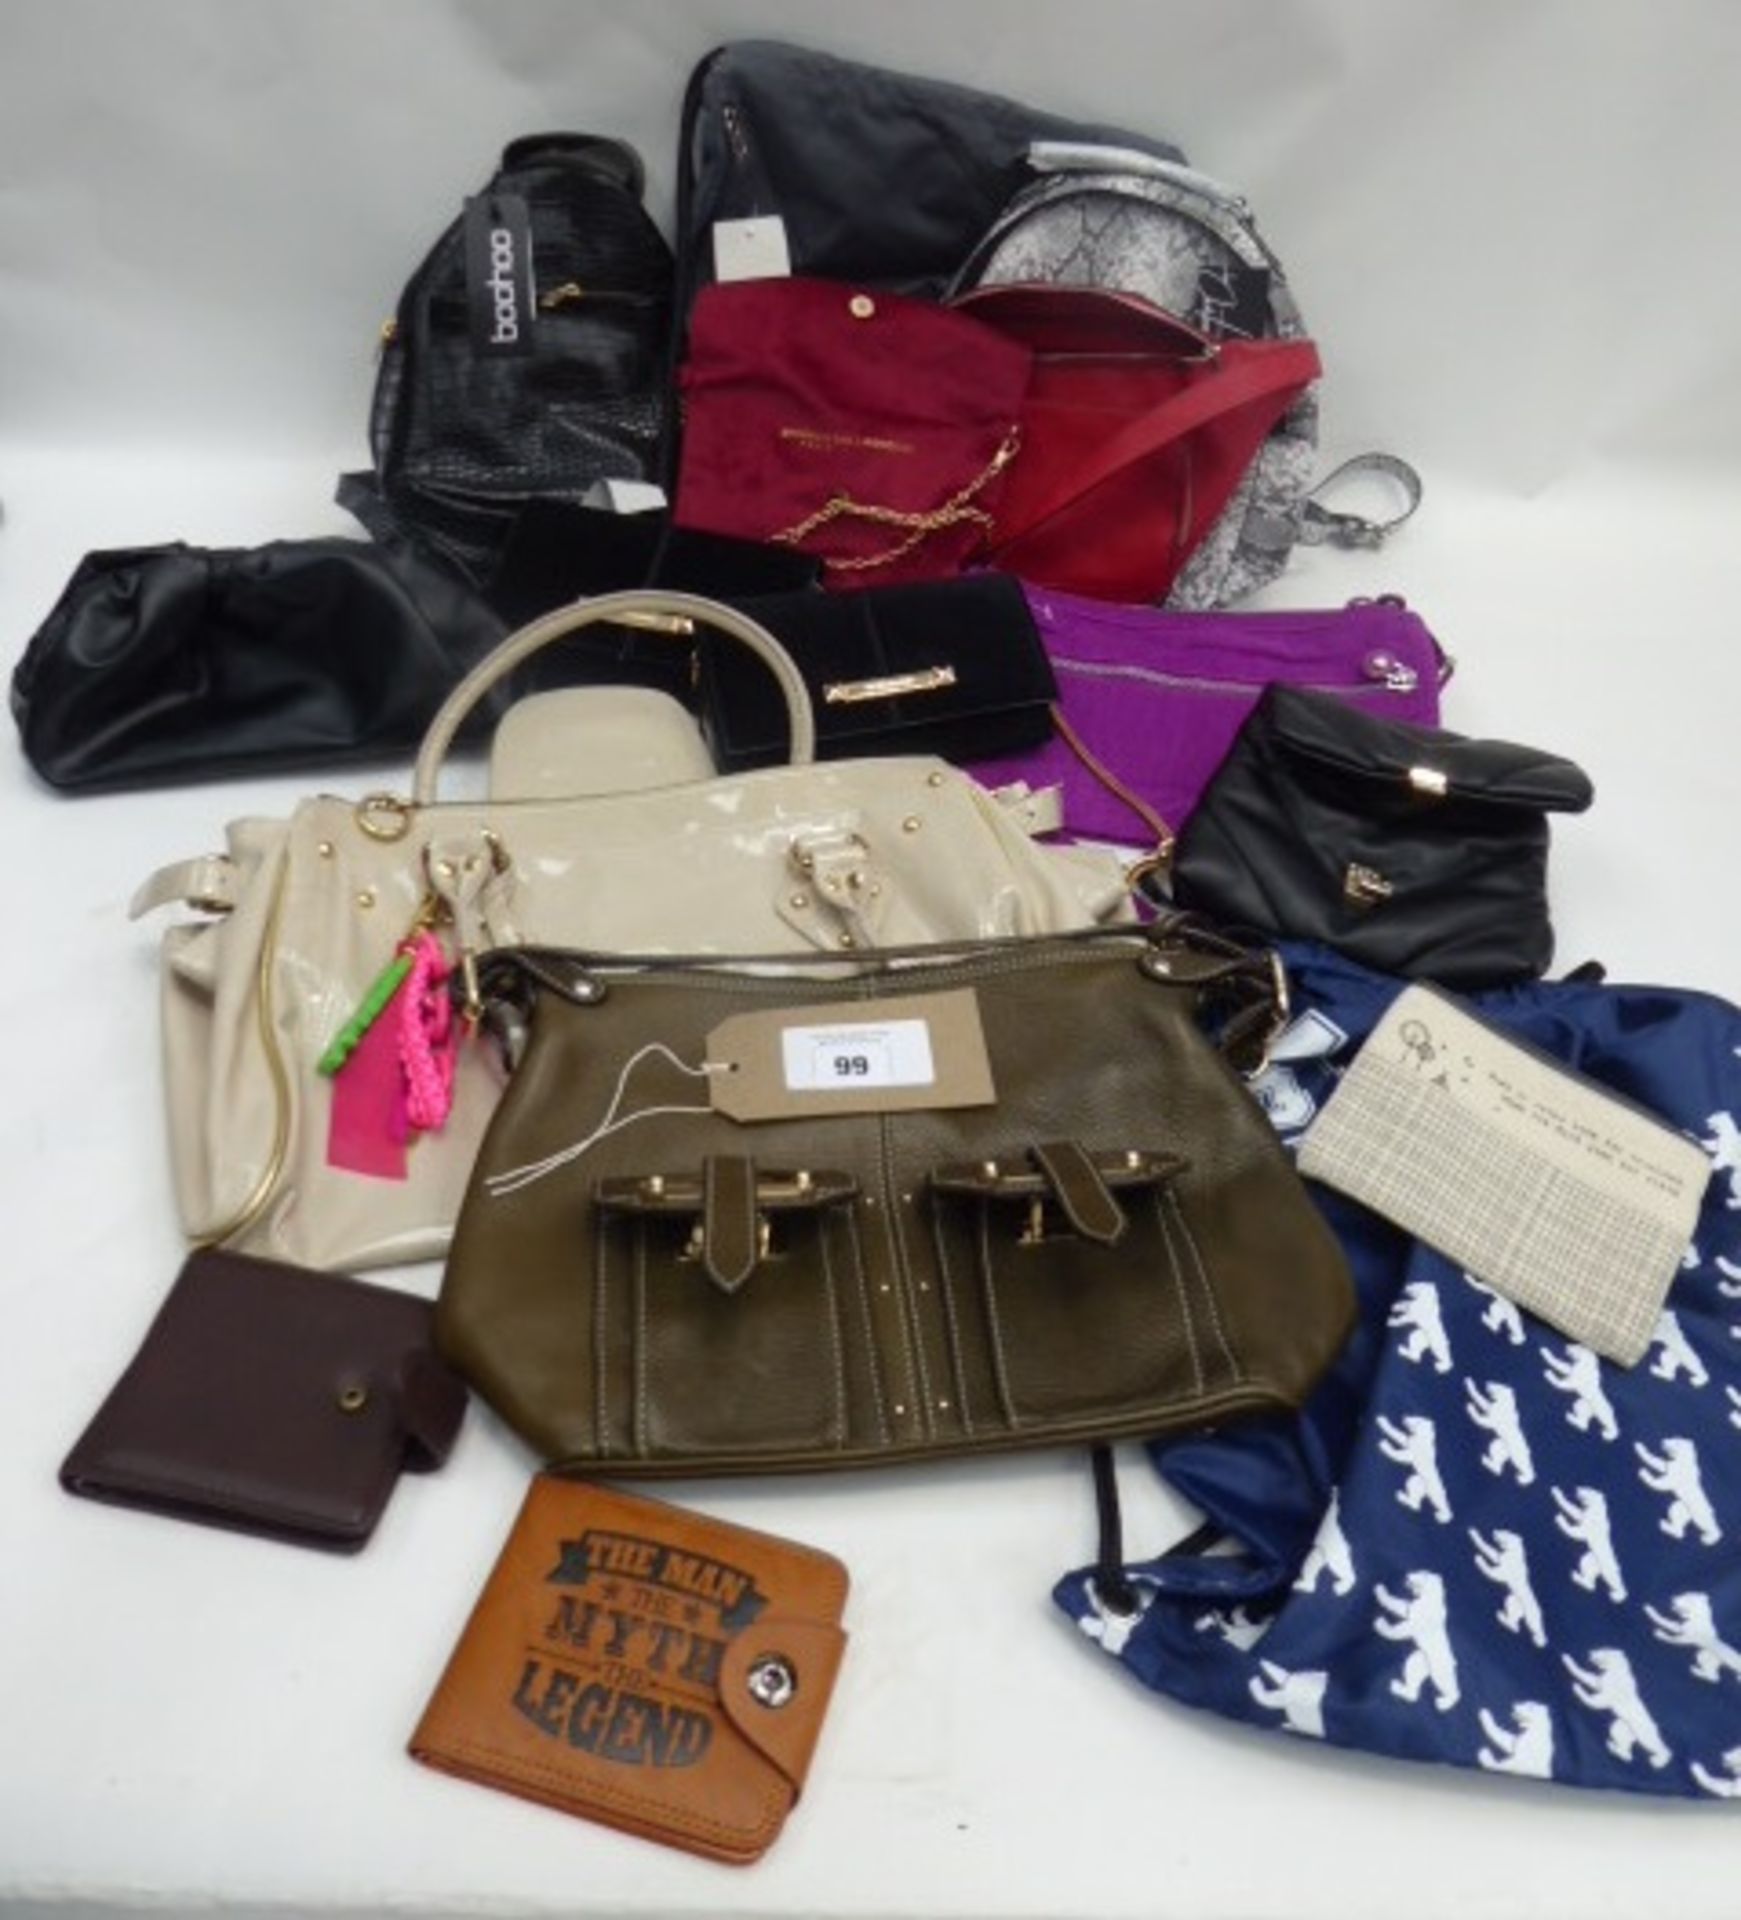 A selection of bags and purses, with brands including Pauls Boutique, River Island, Boohoo, Zara and